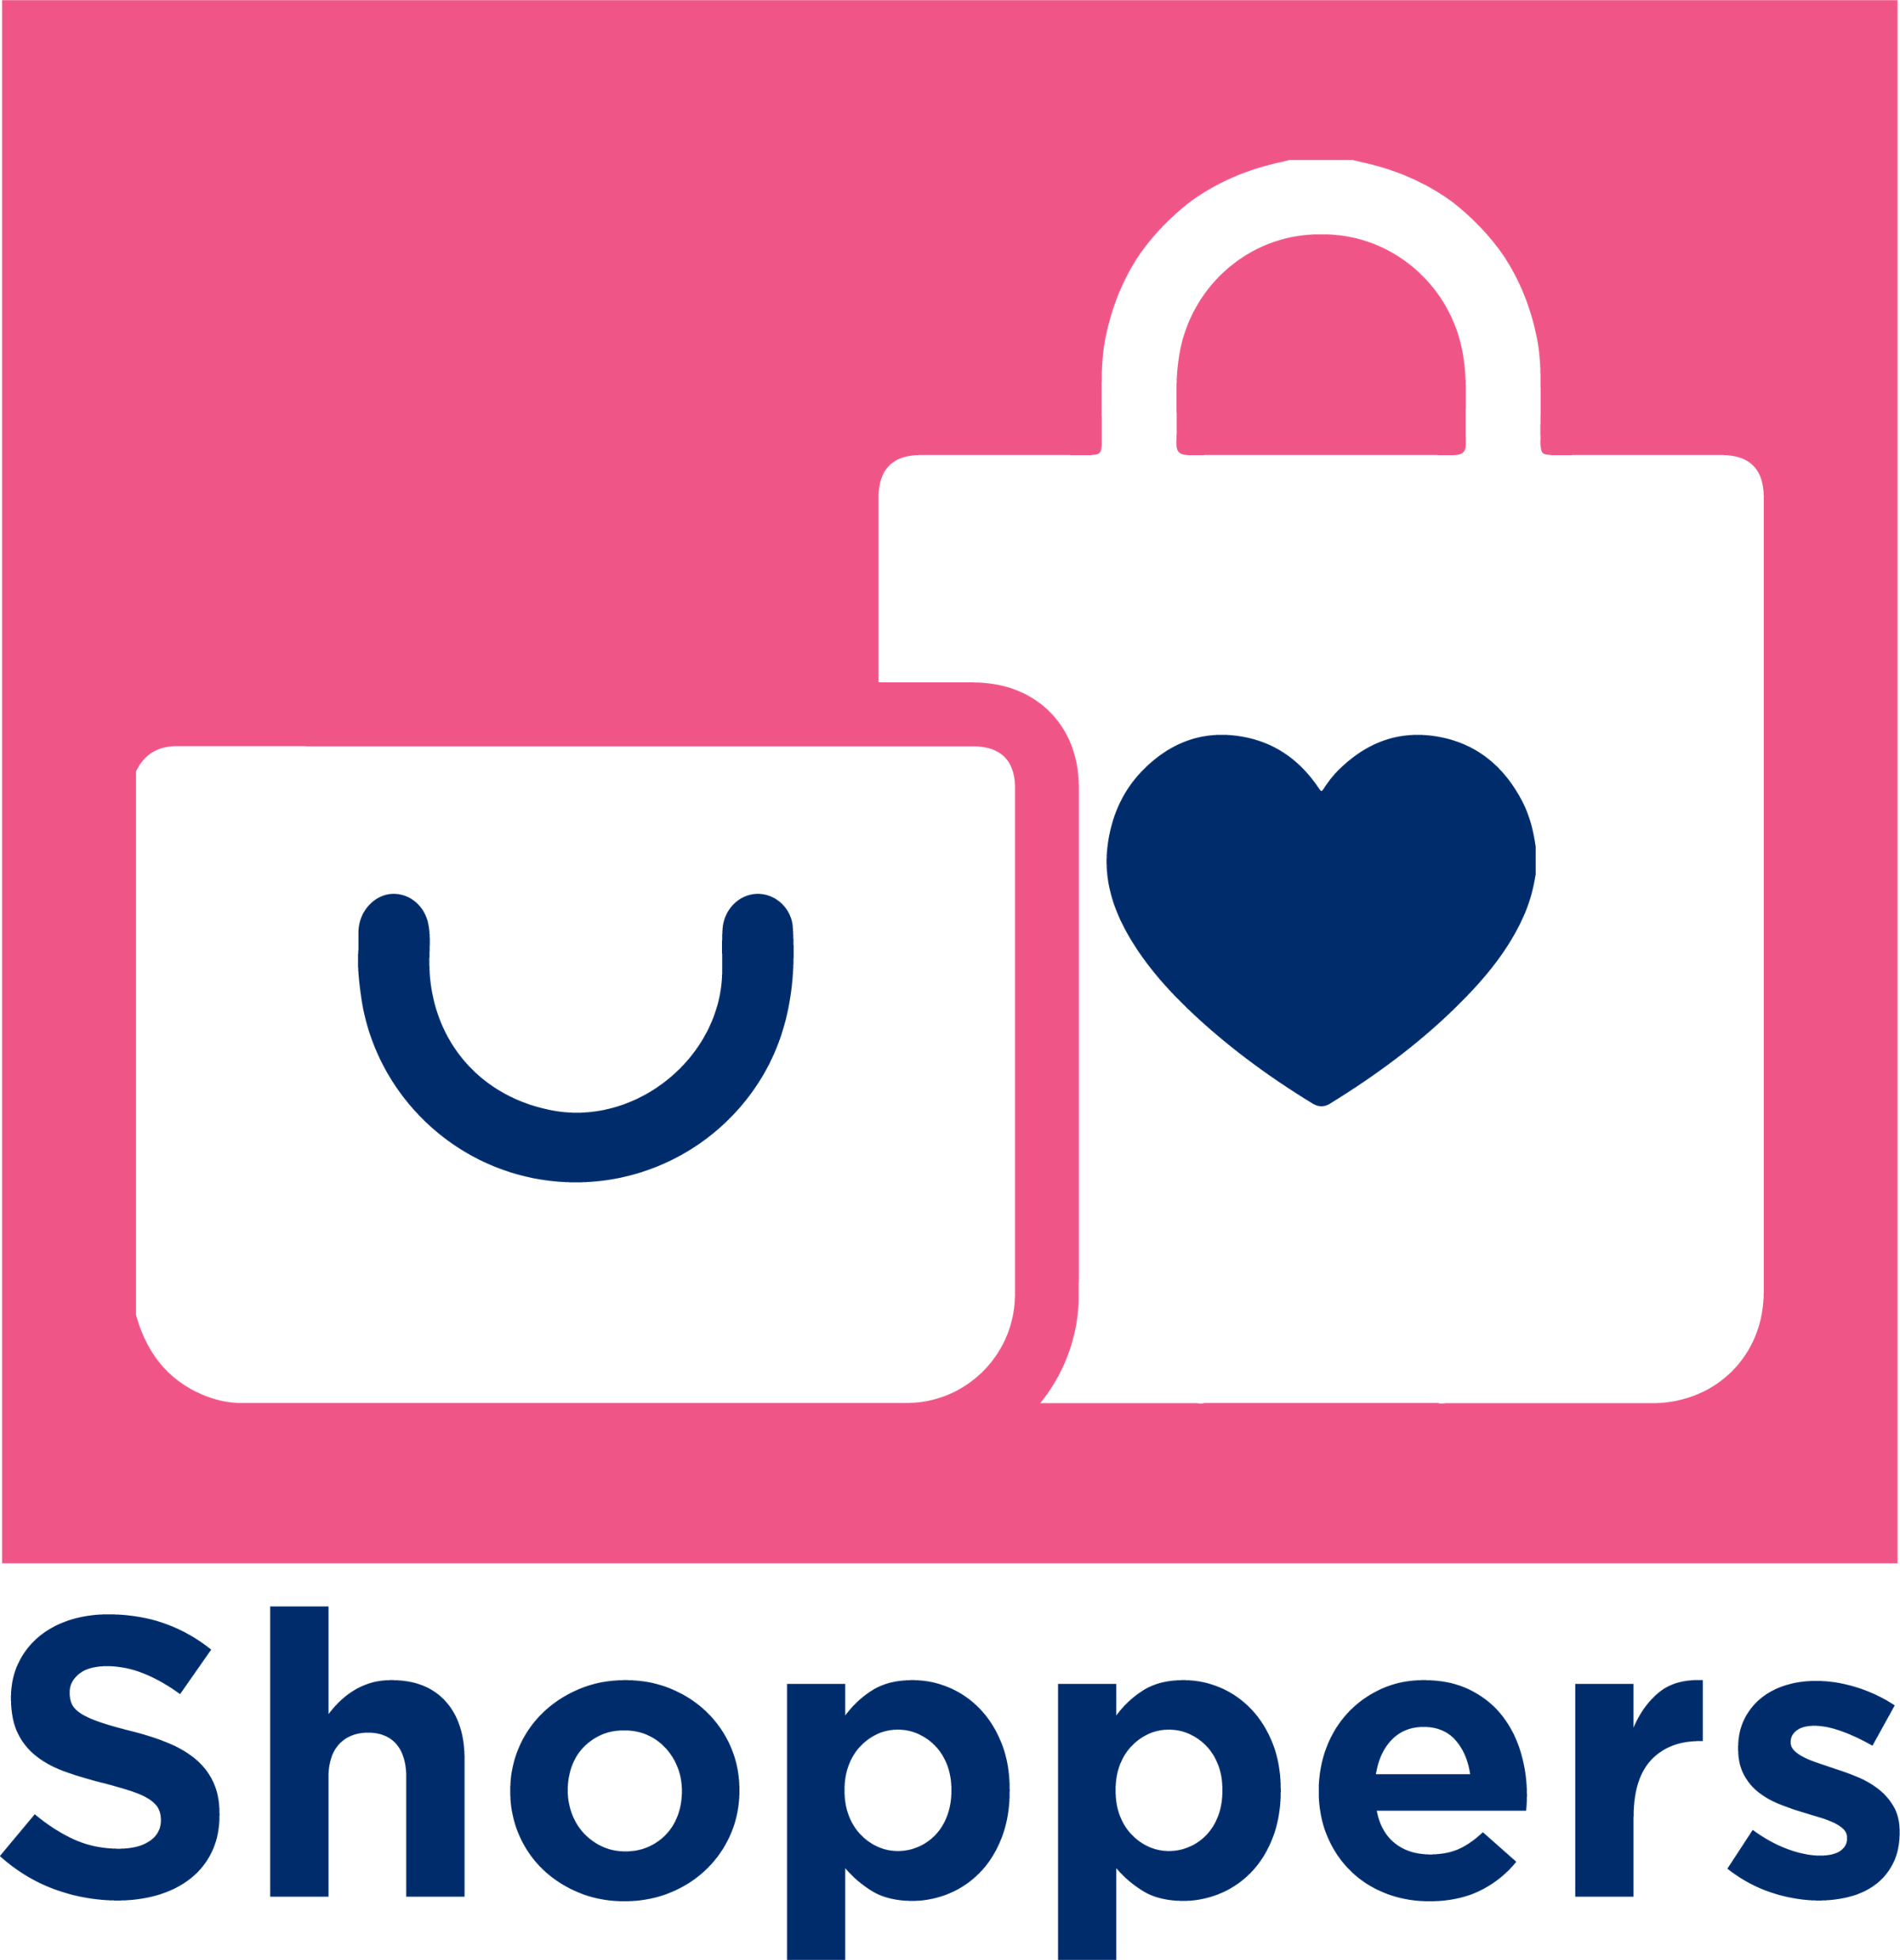 We love Shoppers!